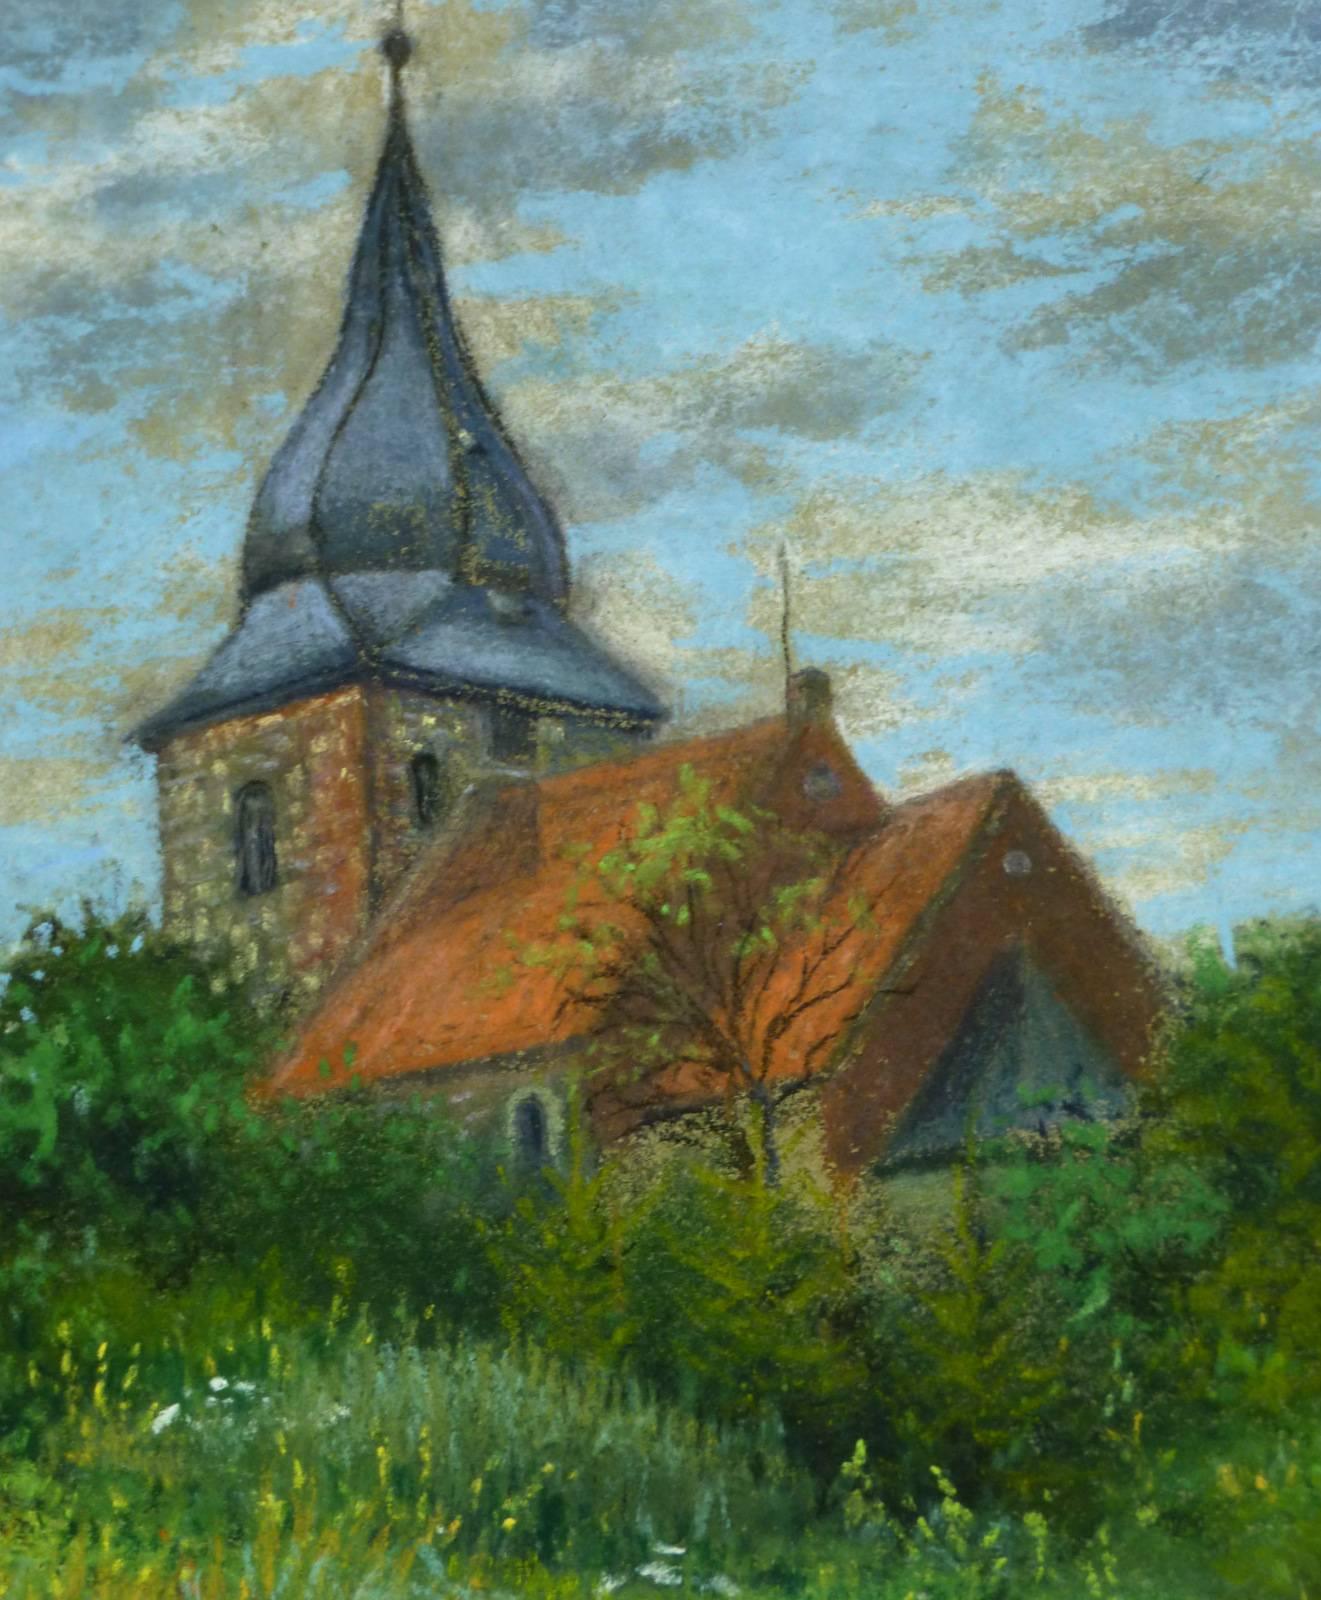 Steepled Building  - Painting by Trant Dalmne